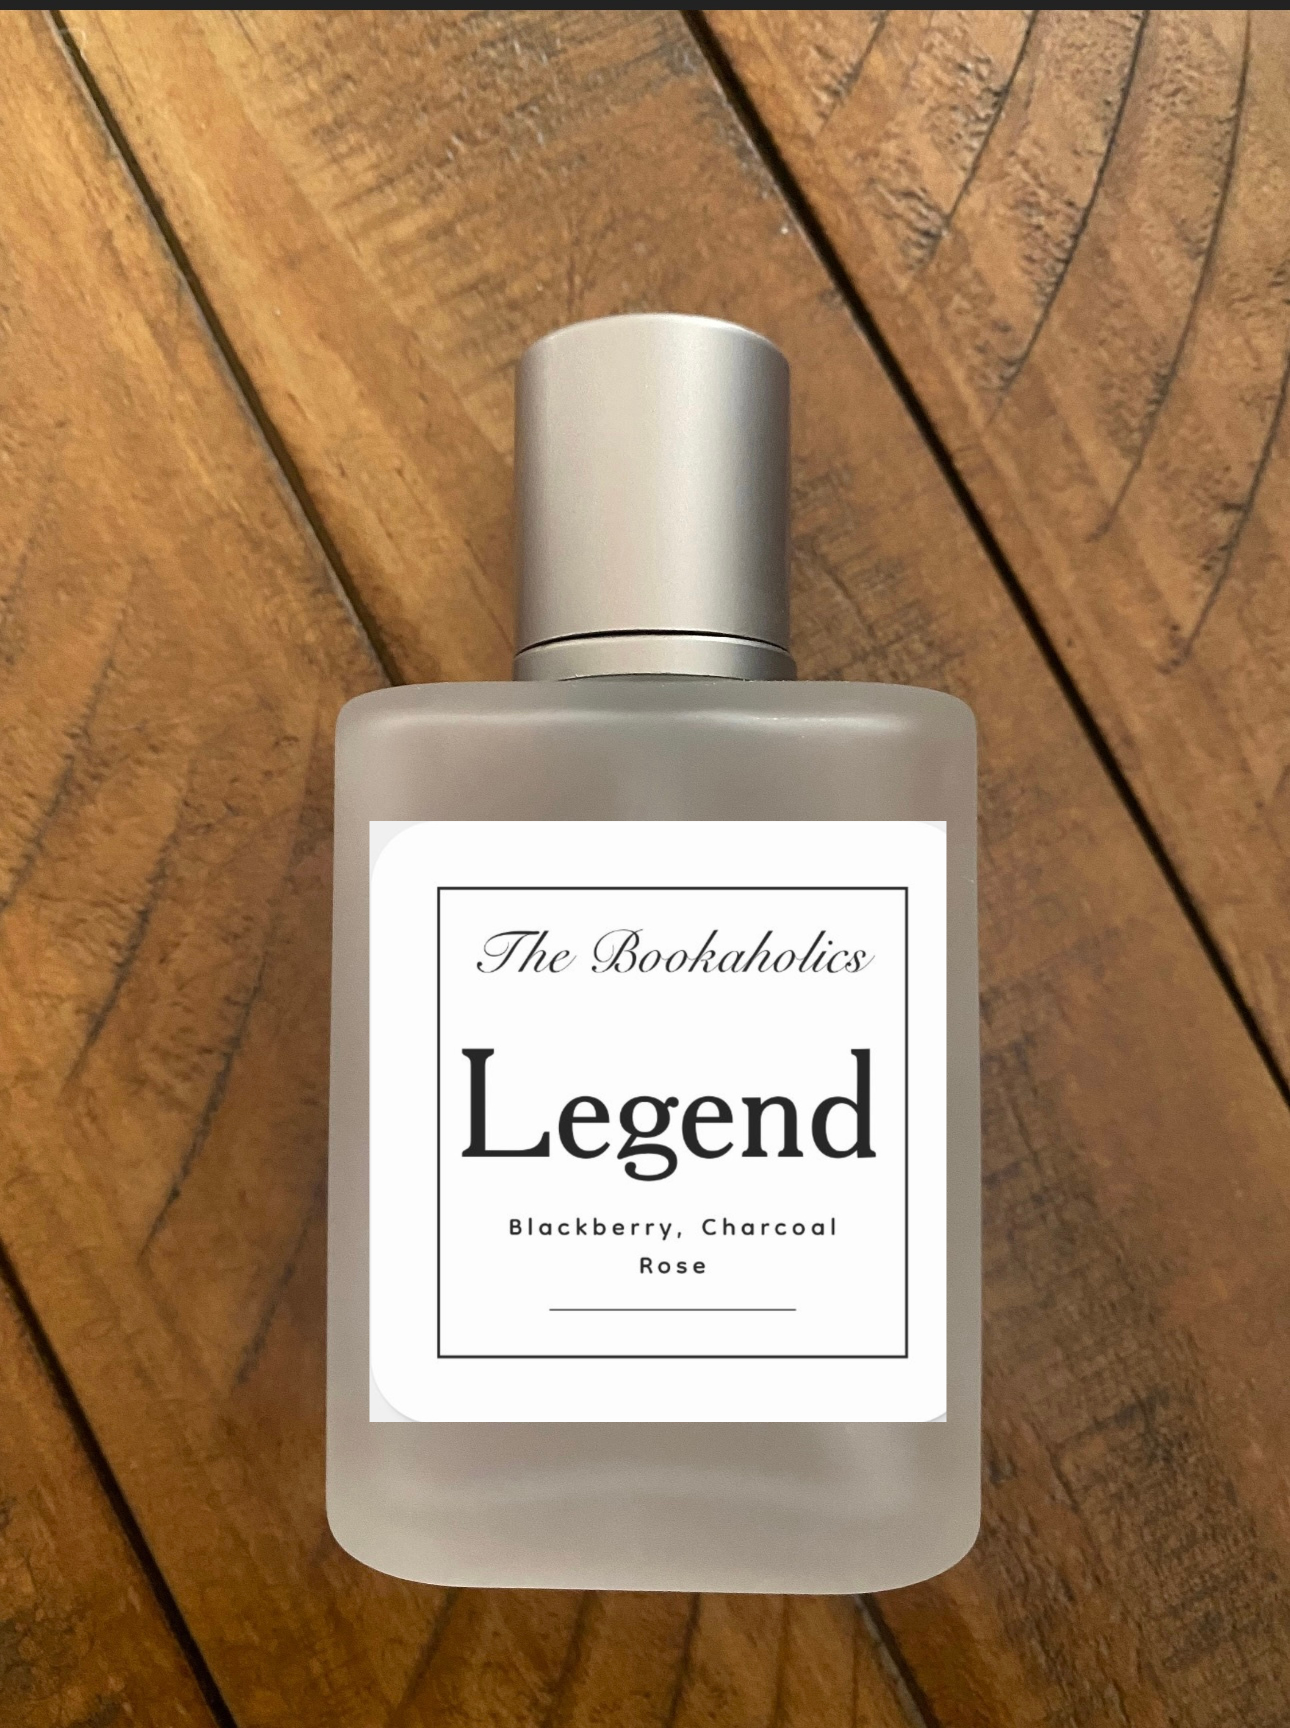 Legend: Cologne inspired by Caraval